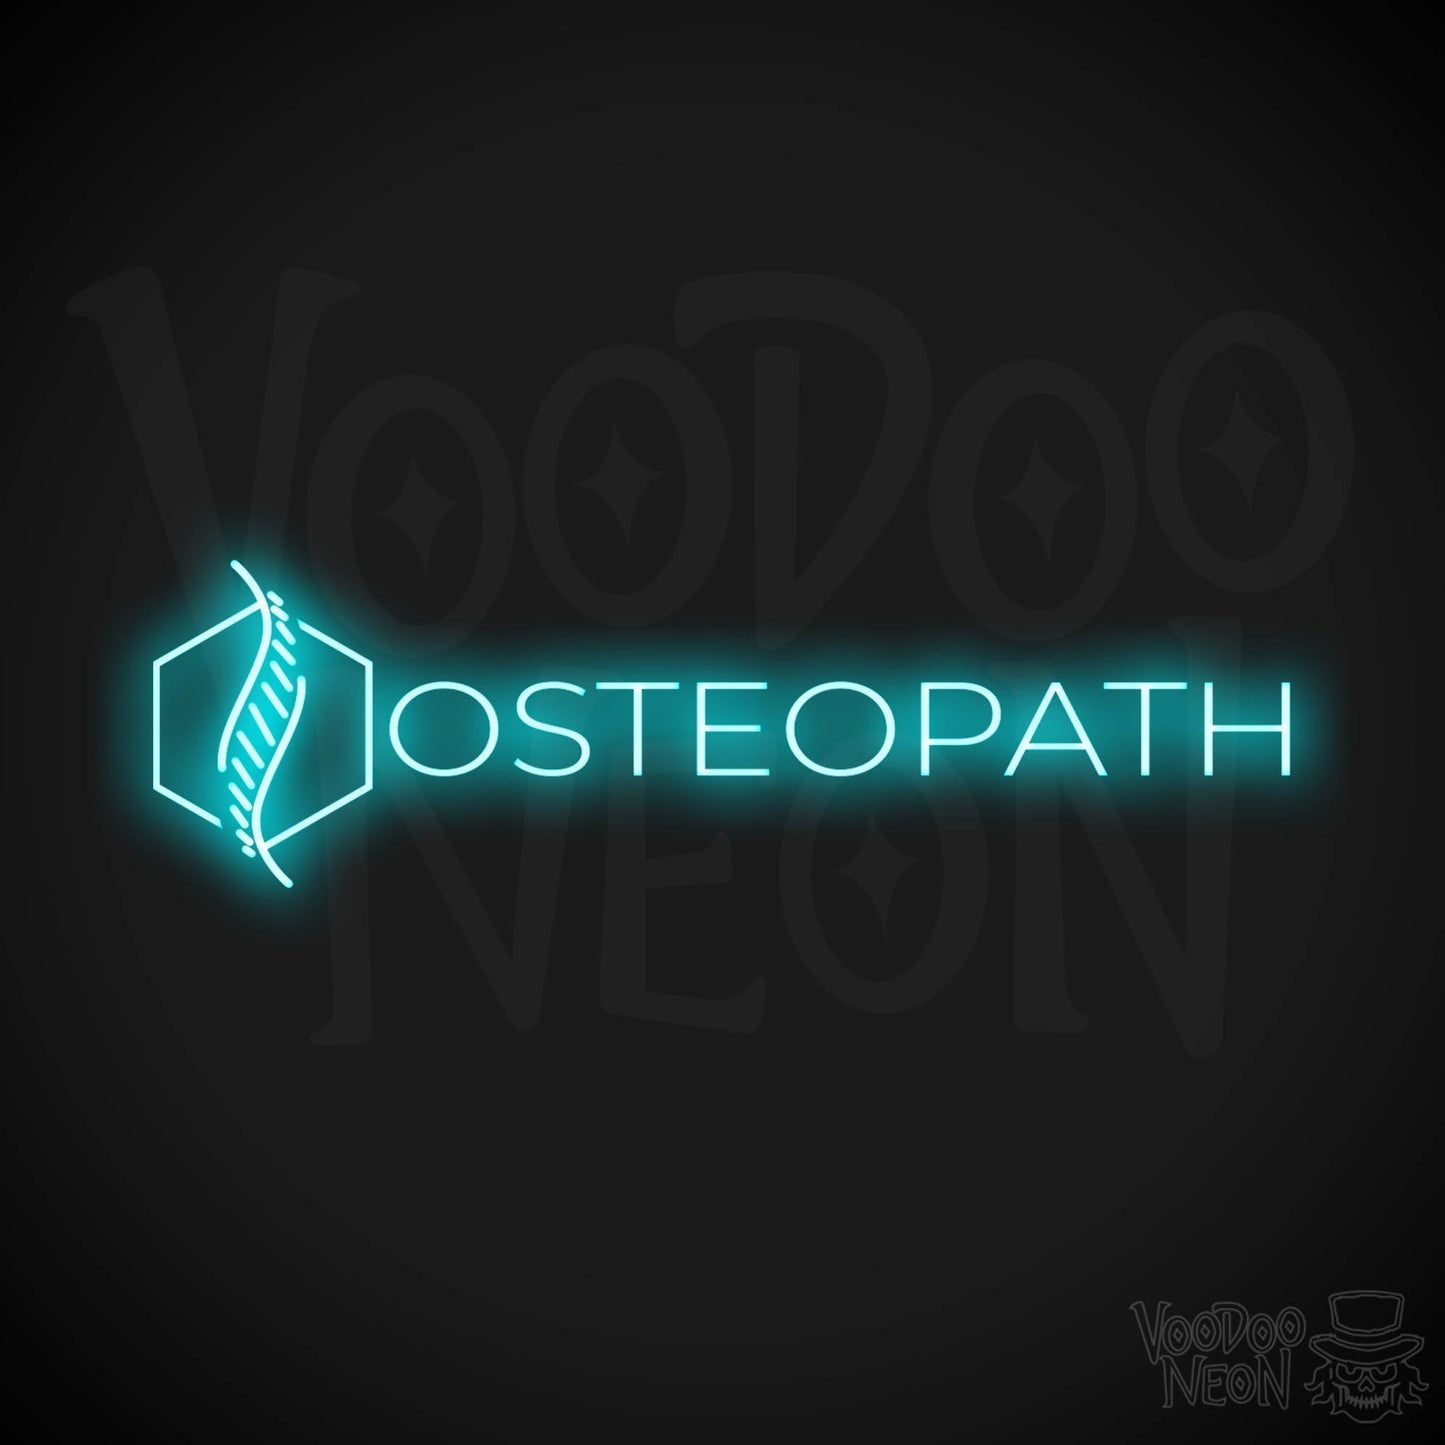 Osteopath LED Neon - Ice Blue